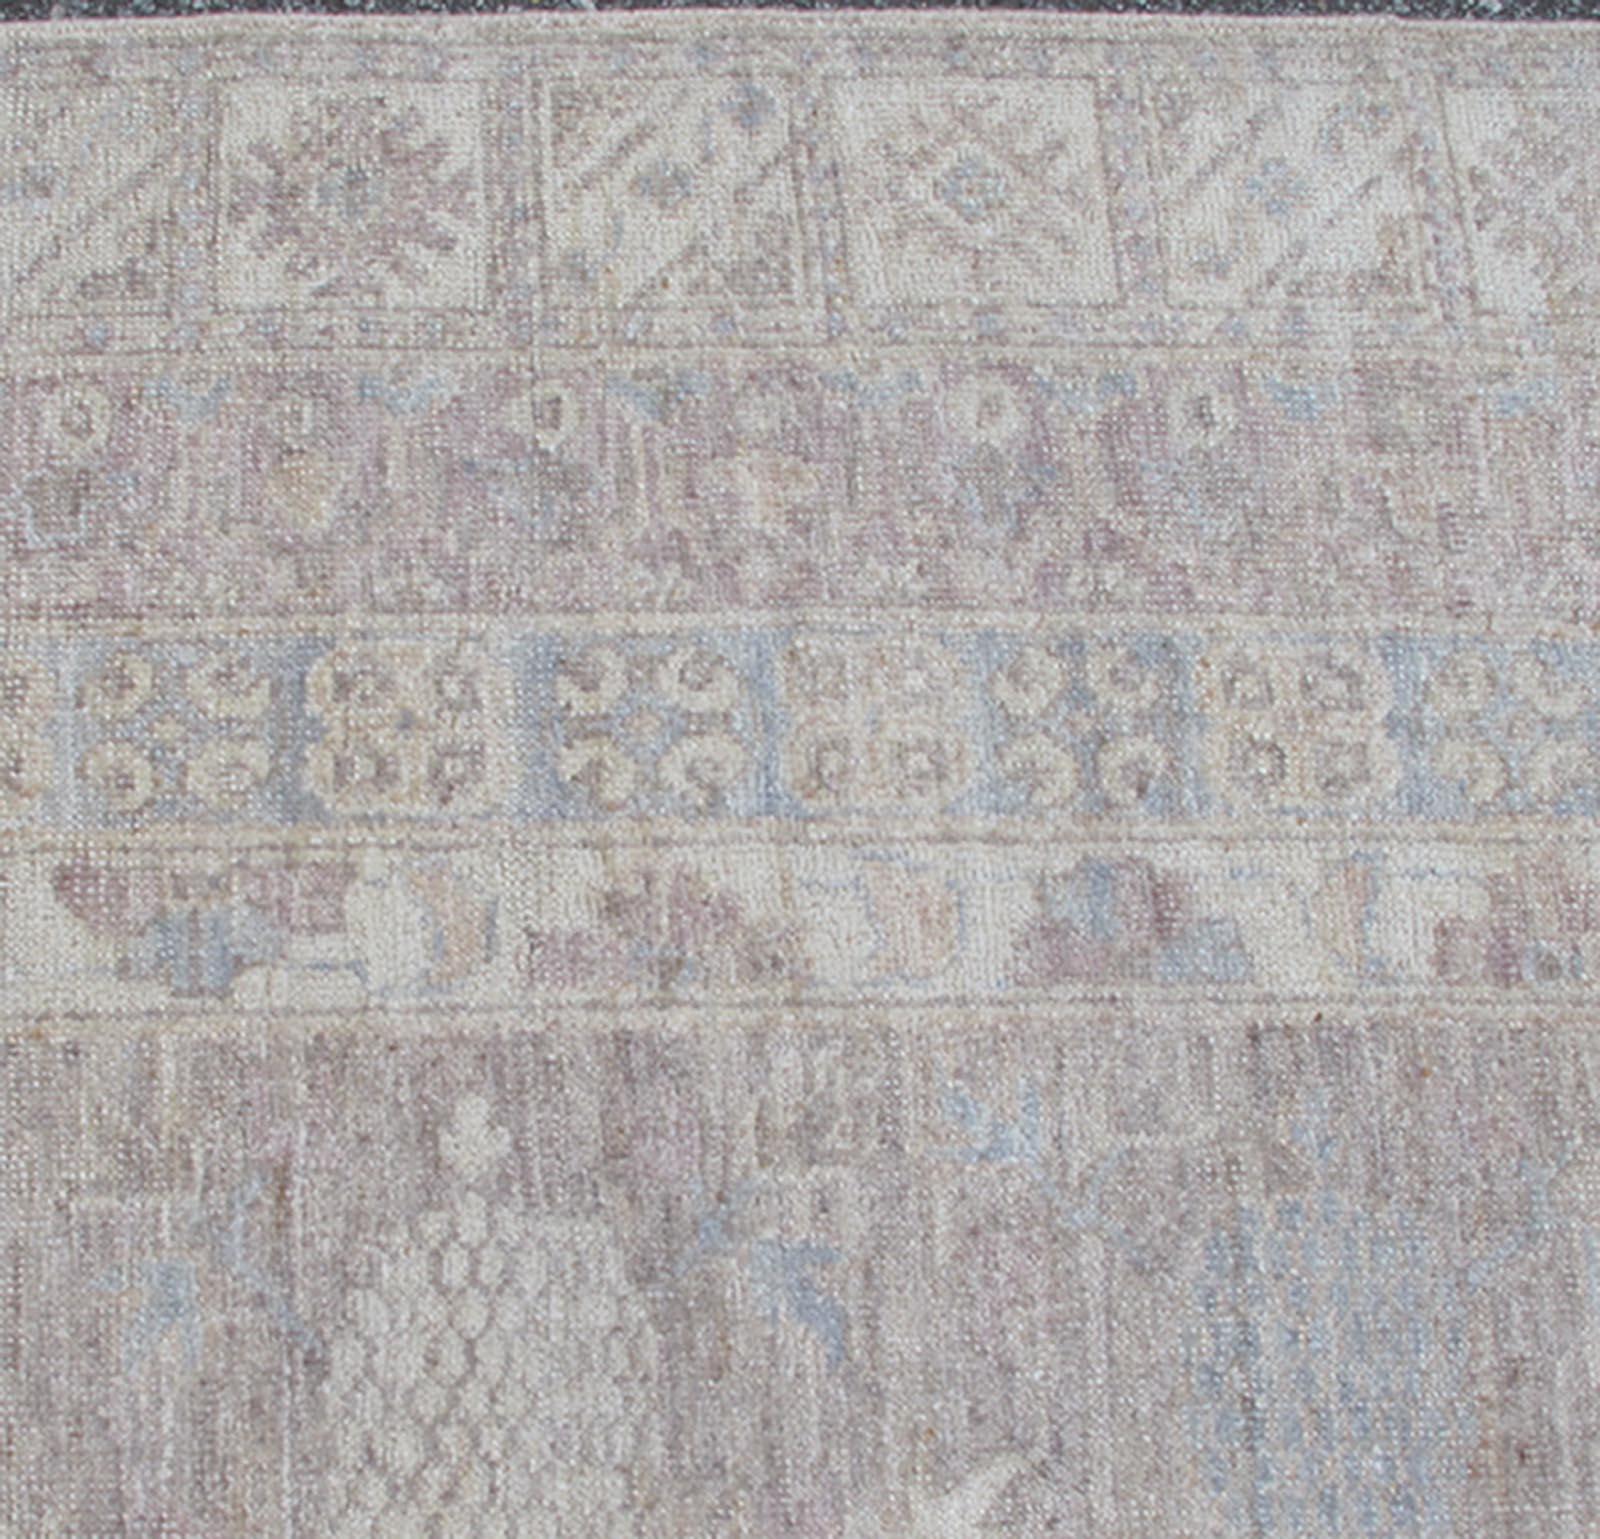 This Khotan features an all-over design flanked by a repeating pattern in the border. The entirety of the piece is rendered in light tones, which makes it a versatile rug, well-suited for a variety of interiors. Colors include light blue, cream and